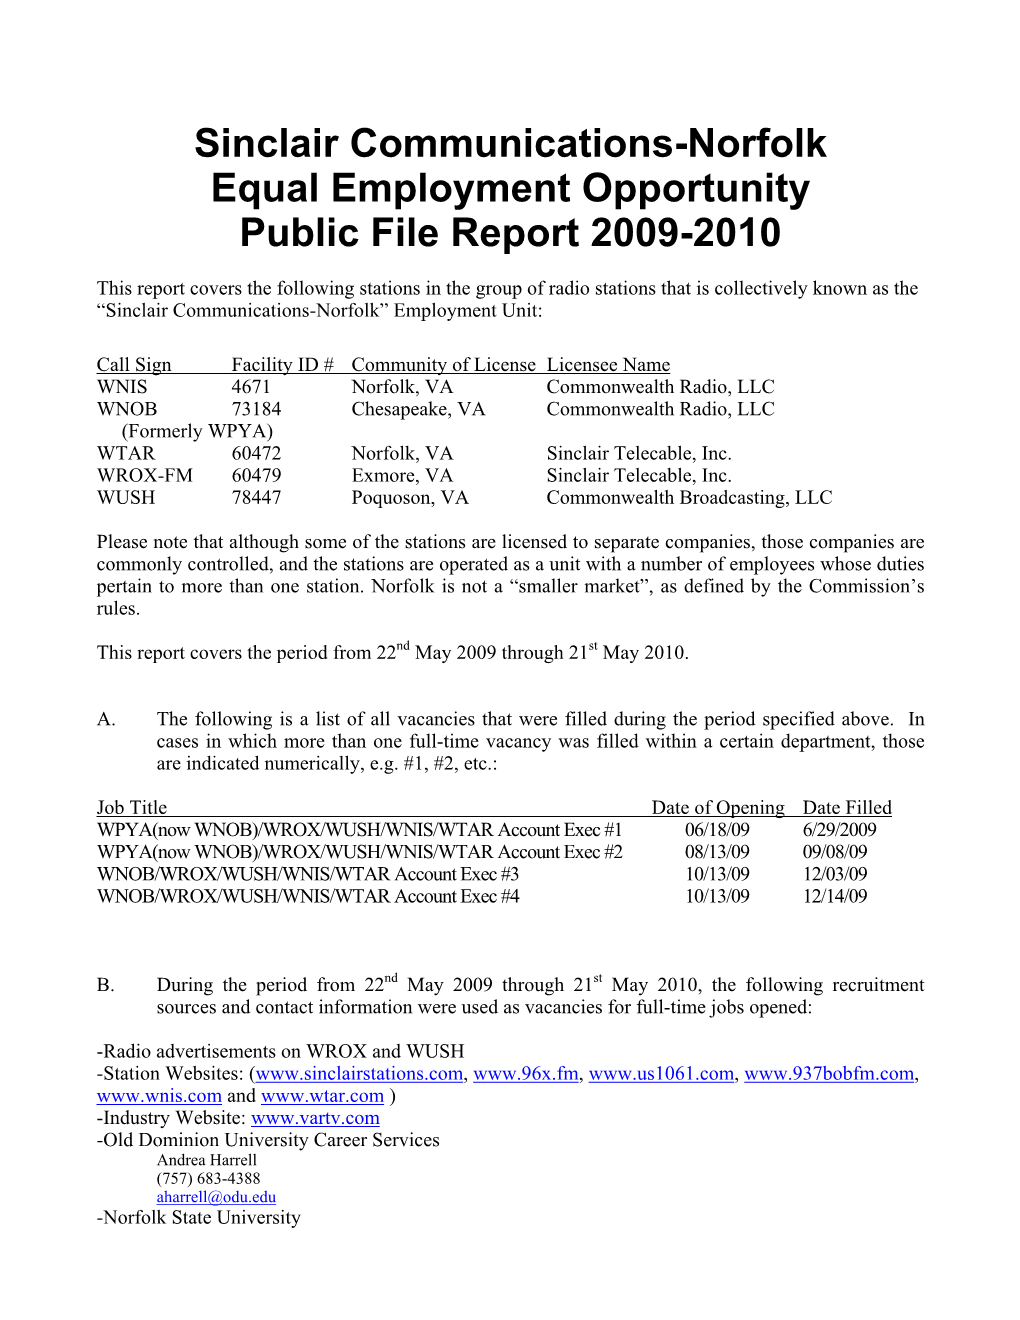 Sinclair Communications-Norfolk Equal Employment Opportunity Public File Report 2009-2010